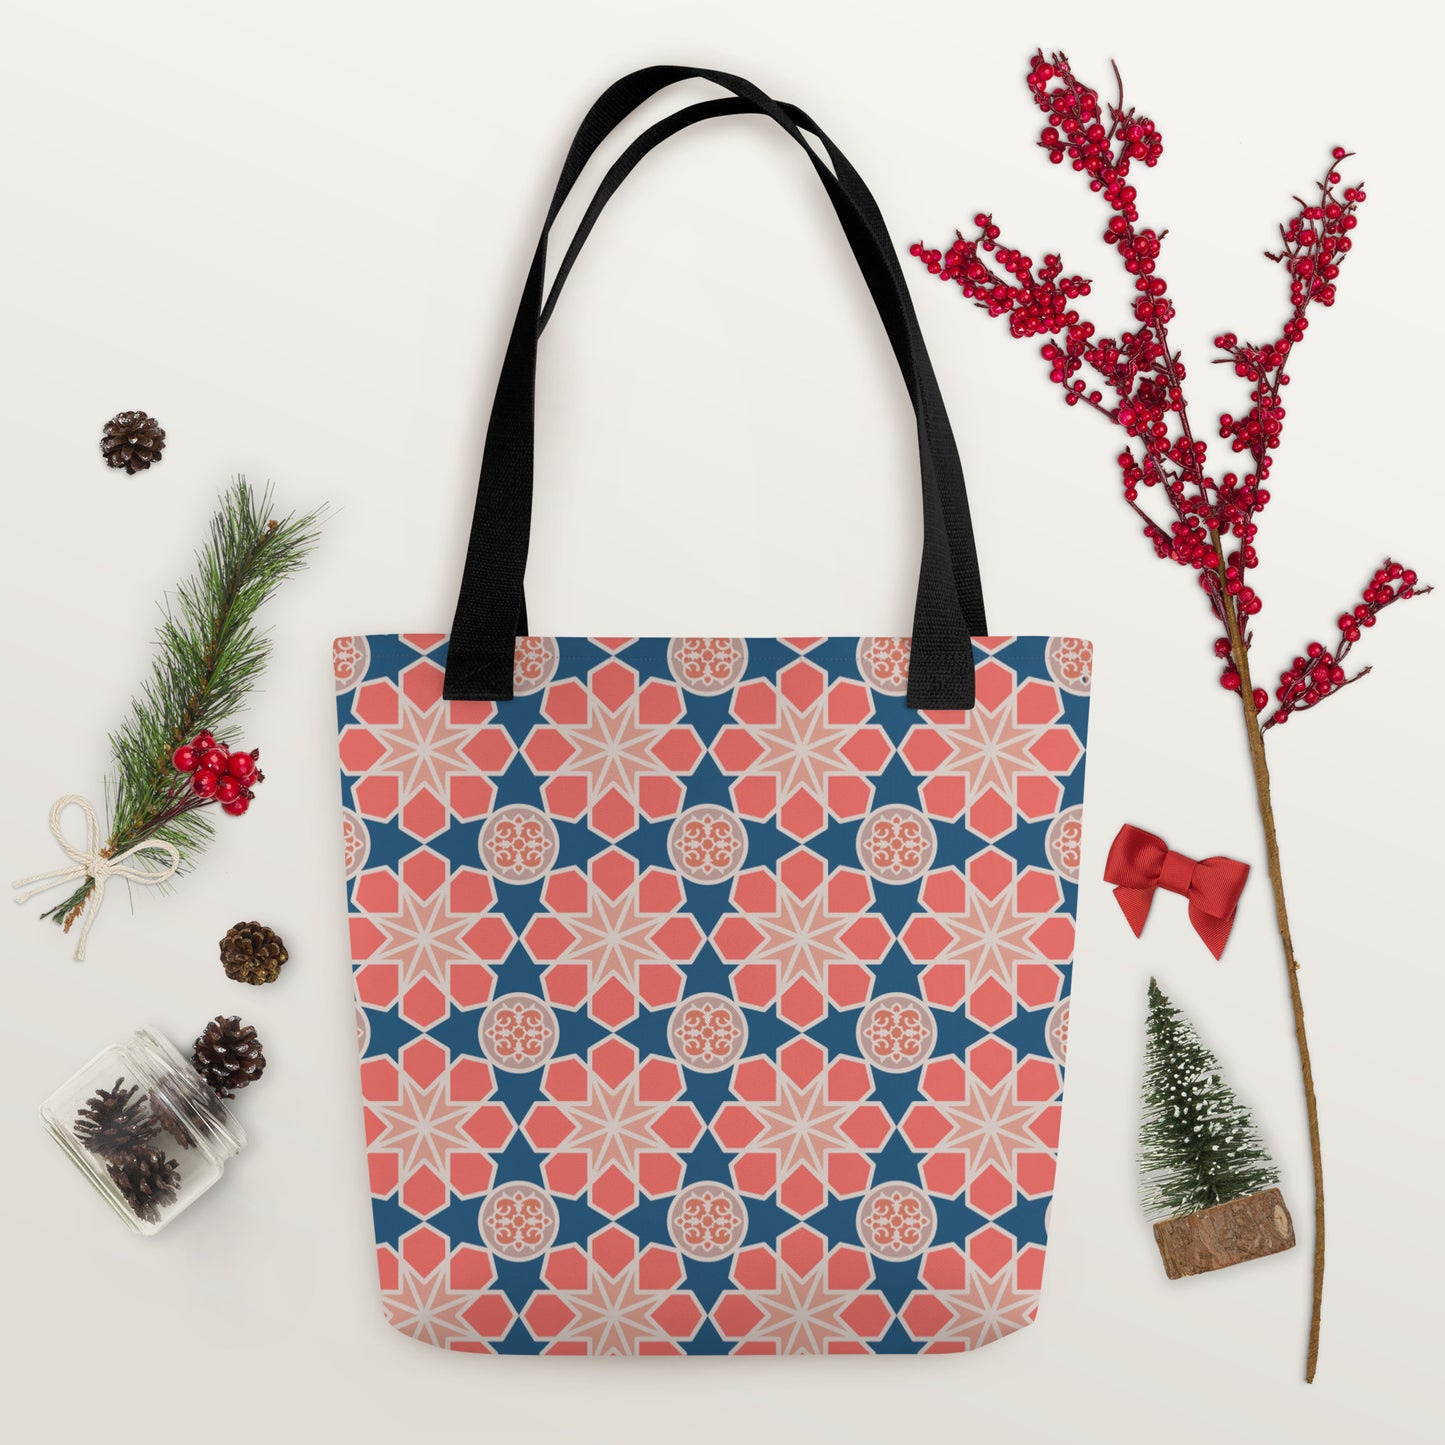 Tote bag - Geometric Arabesque Mash up in Pink